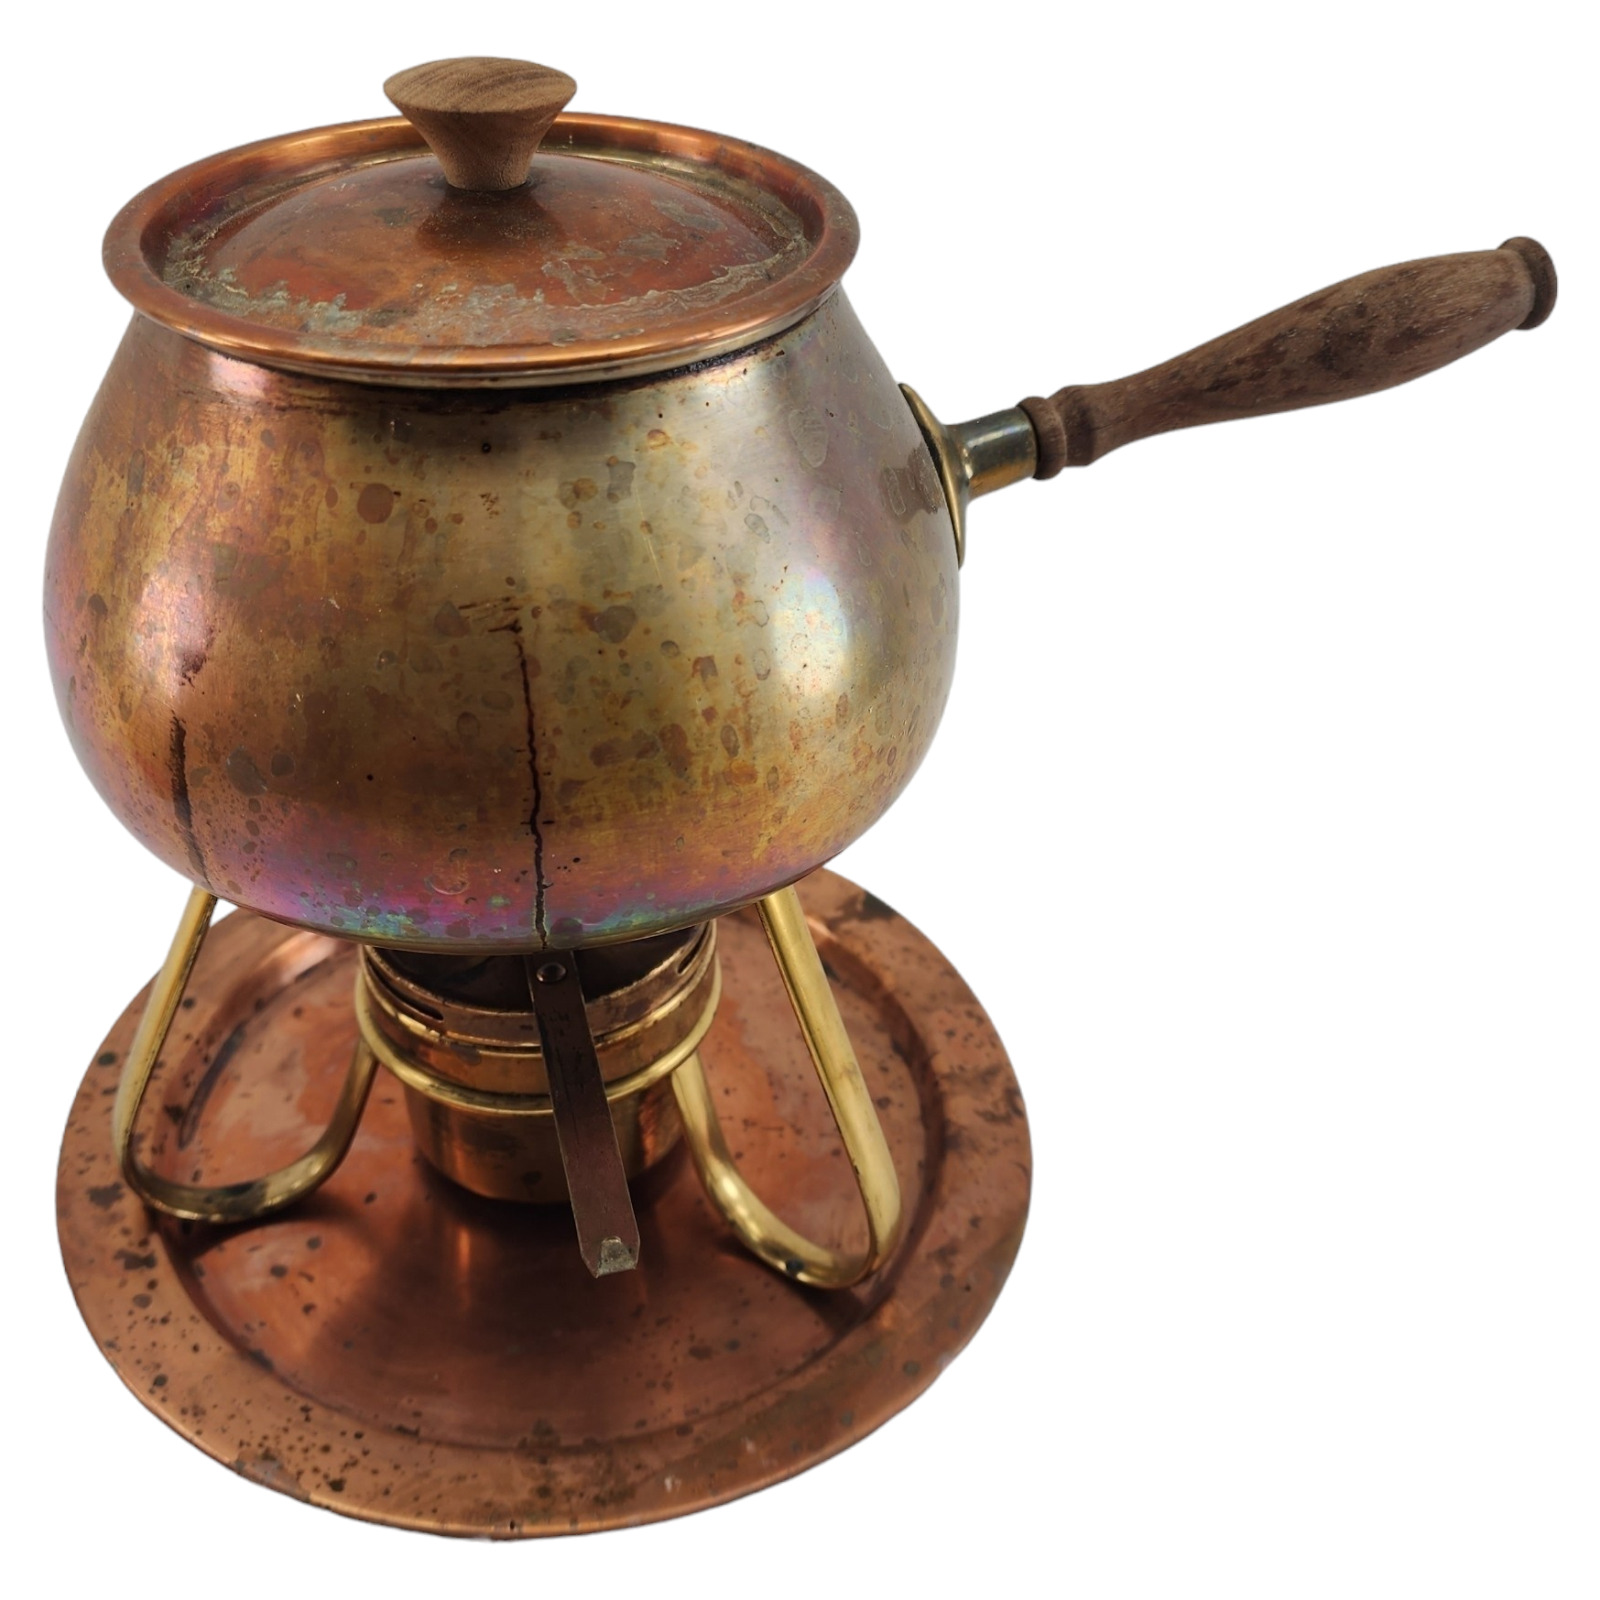 Vintage Copper Chafing Dish/Fondue Pot - TAGUS - Made in Portugal